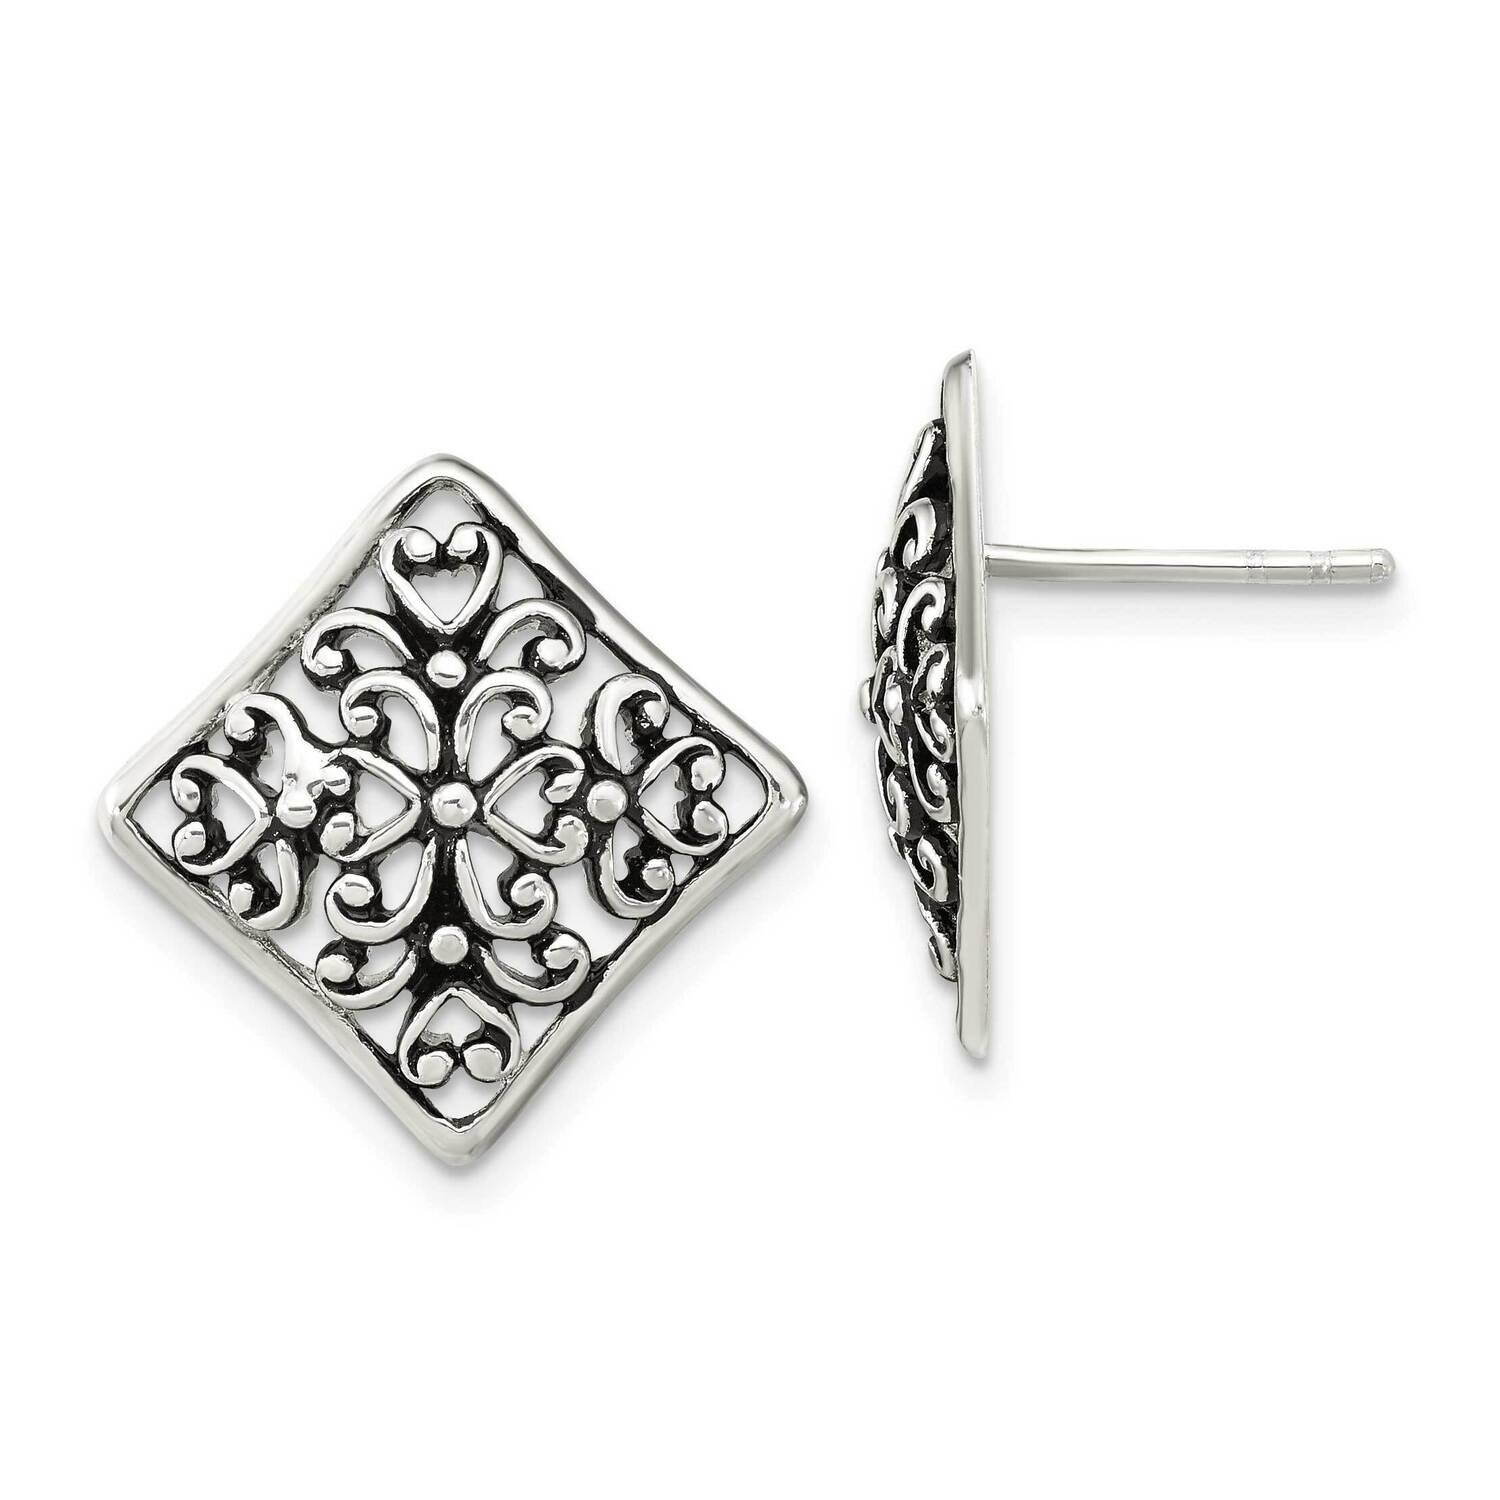 Square Filigree Post Earrings Sterling Silver Antiqued QE16038